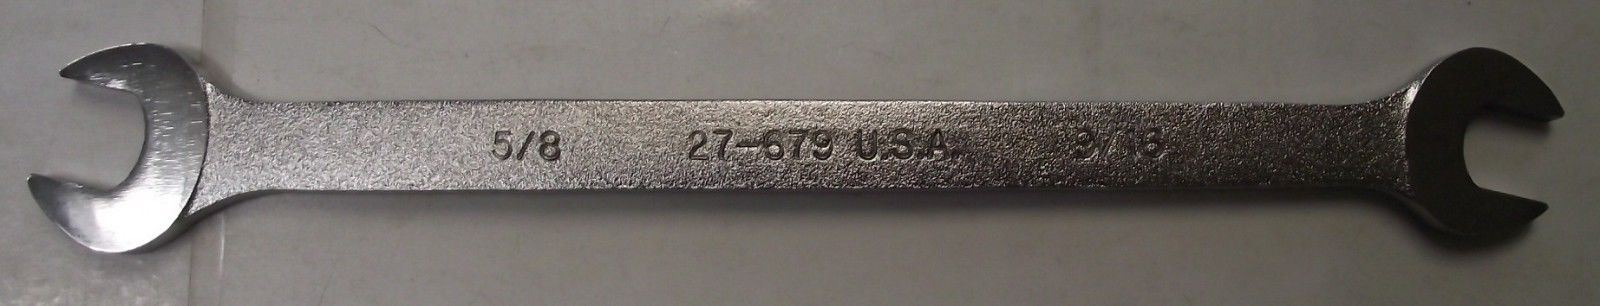 Armstrong 27-679 9/16" X 5/8" Open End Tappet Wrench Thin Flat 10" Long USA